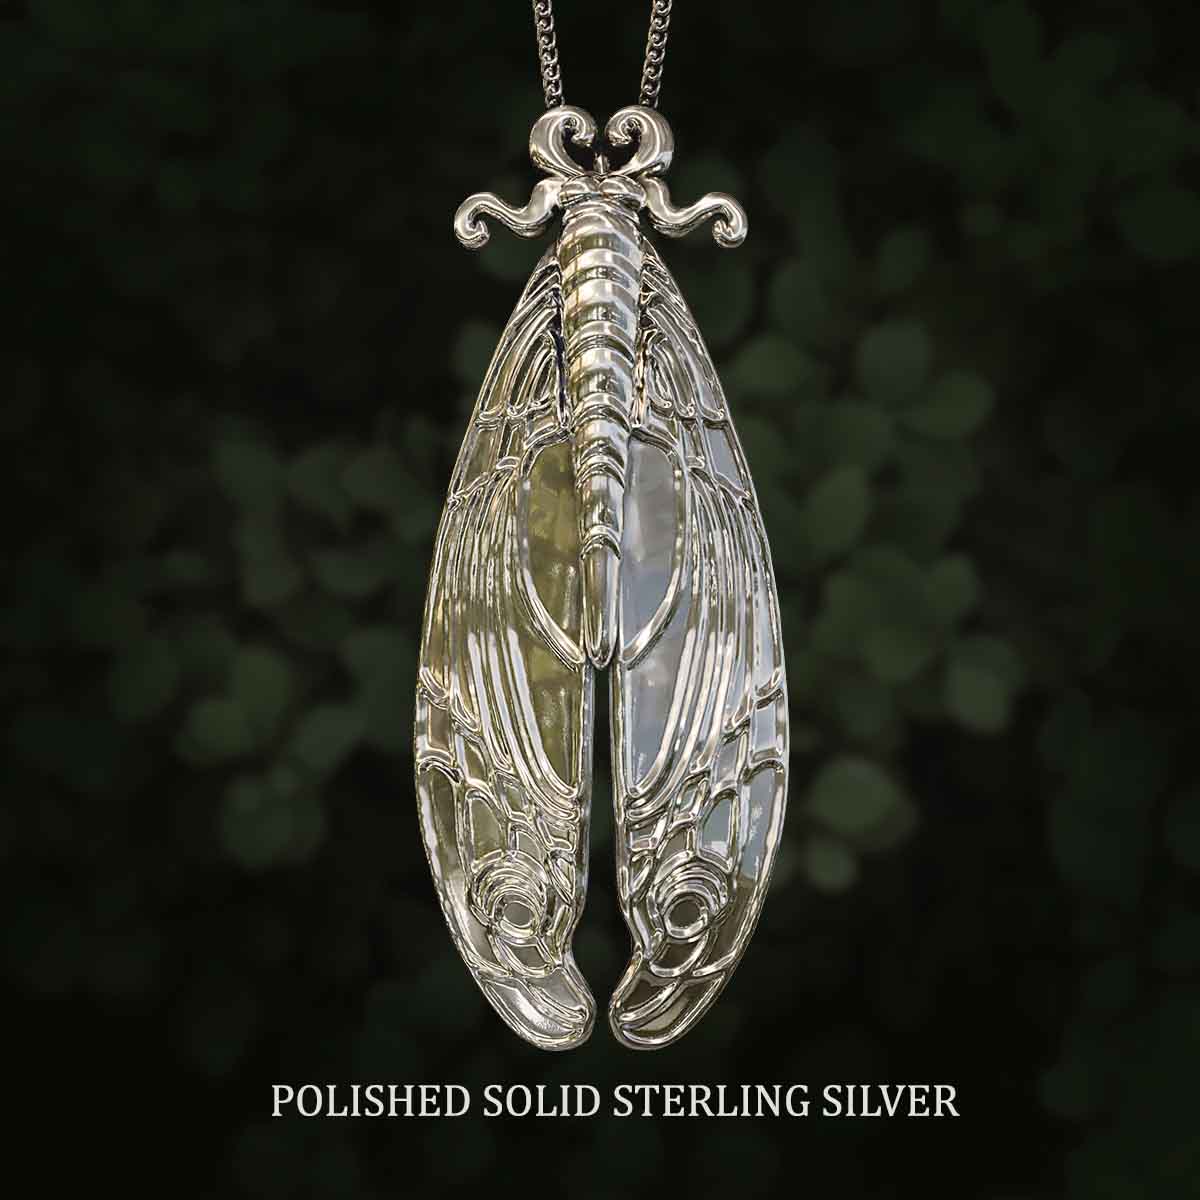 Polished-Solid-Sterling-Silver-Art-Nouveau-Moth-Pendant-Jewelry-For-Necklace